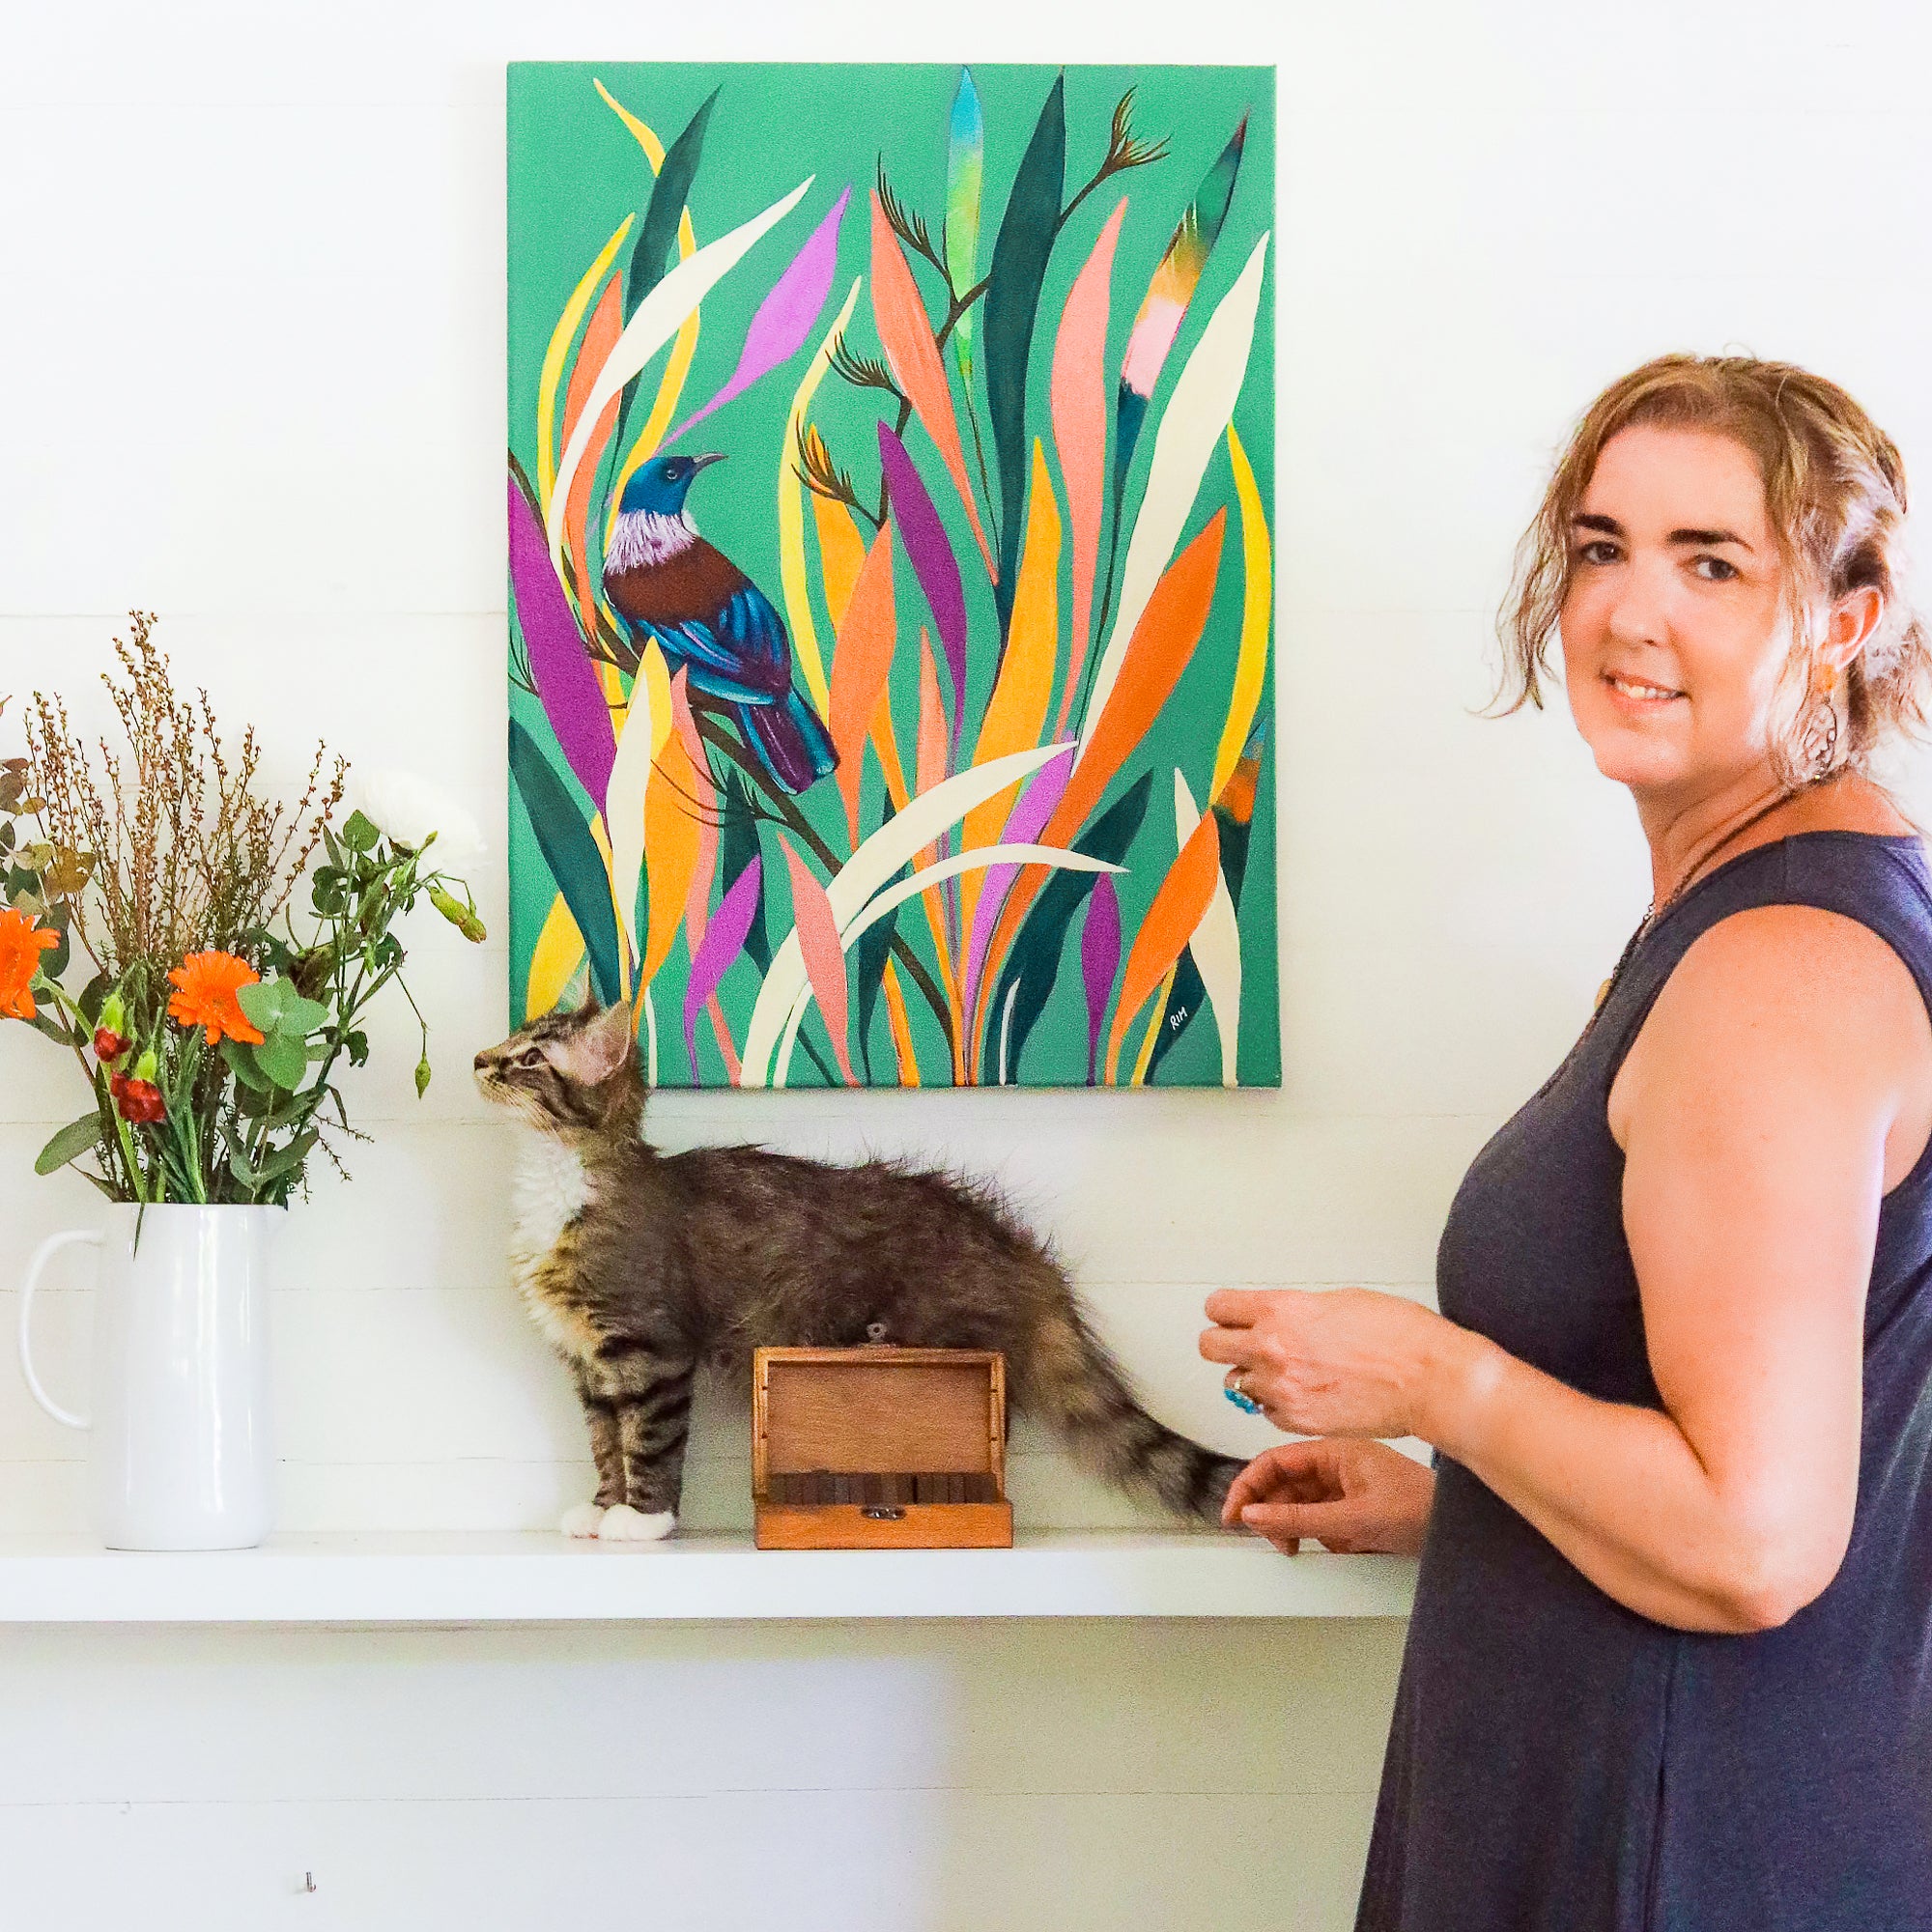 This is an image of a woman, standing in front of a painting with a Tui bird, and there is a small kitten and a vase of flowers.  